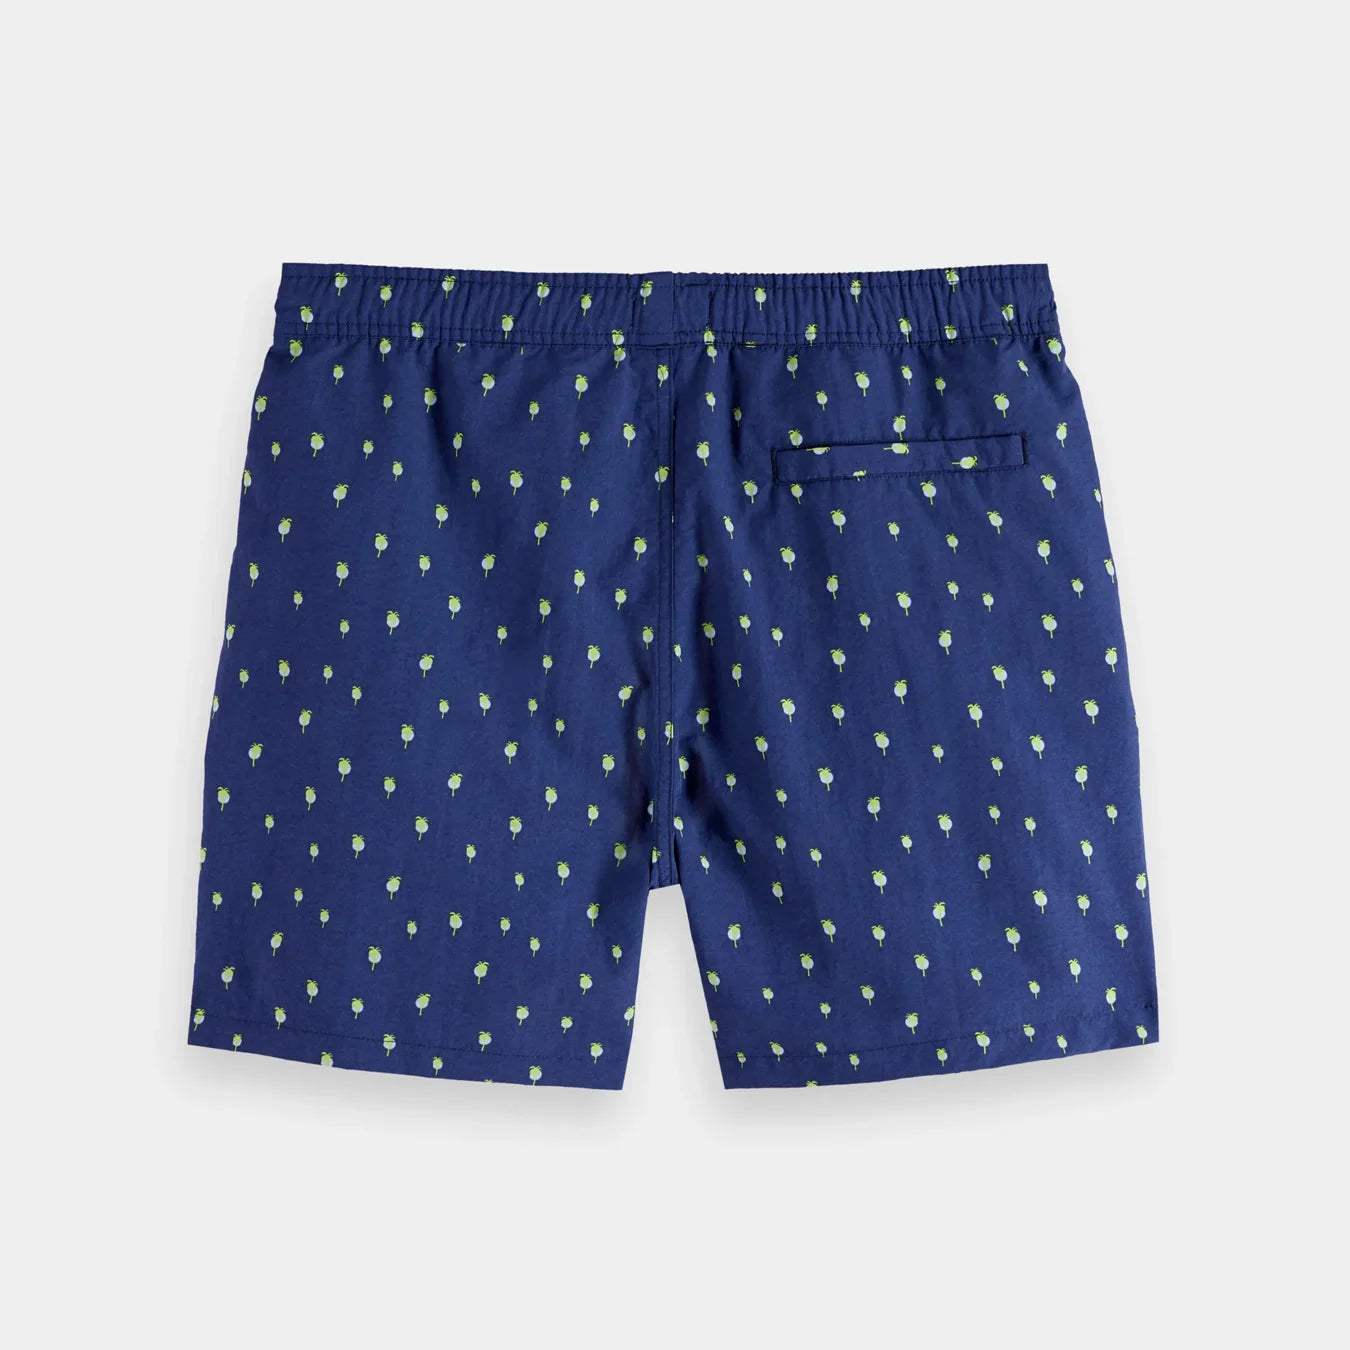 'Scotch & Soda Mid-Length Printed Swim Shorts' in 'Navy Palm Dots' colour